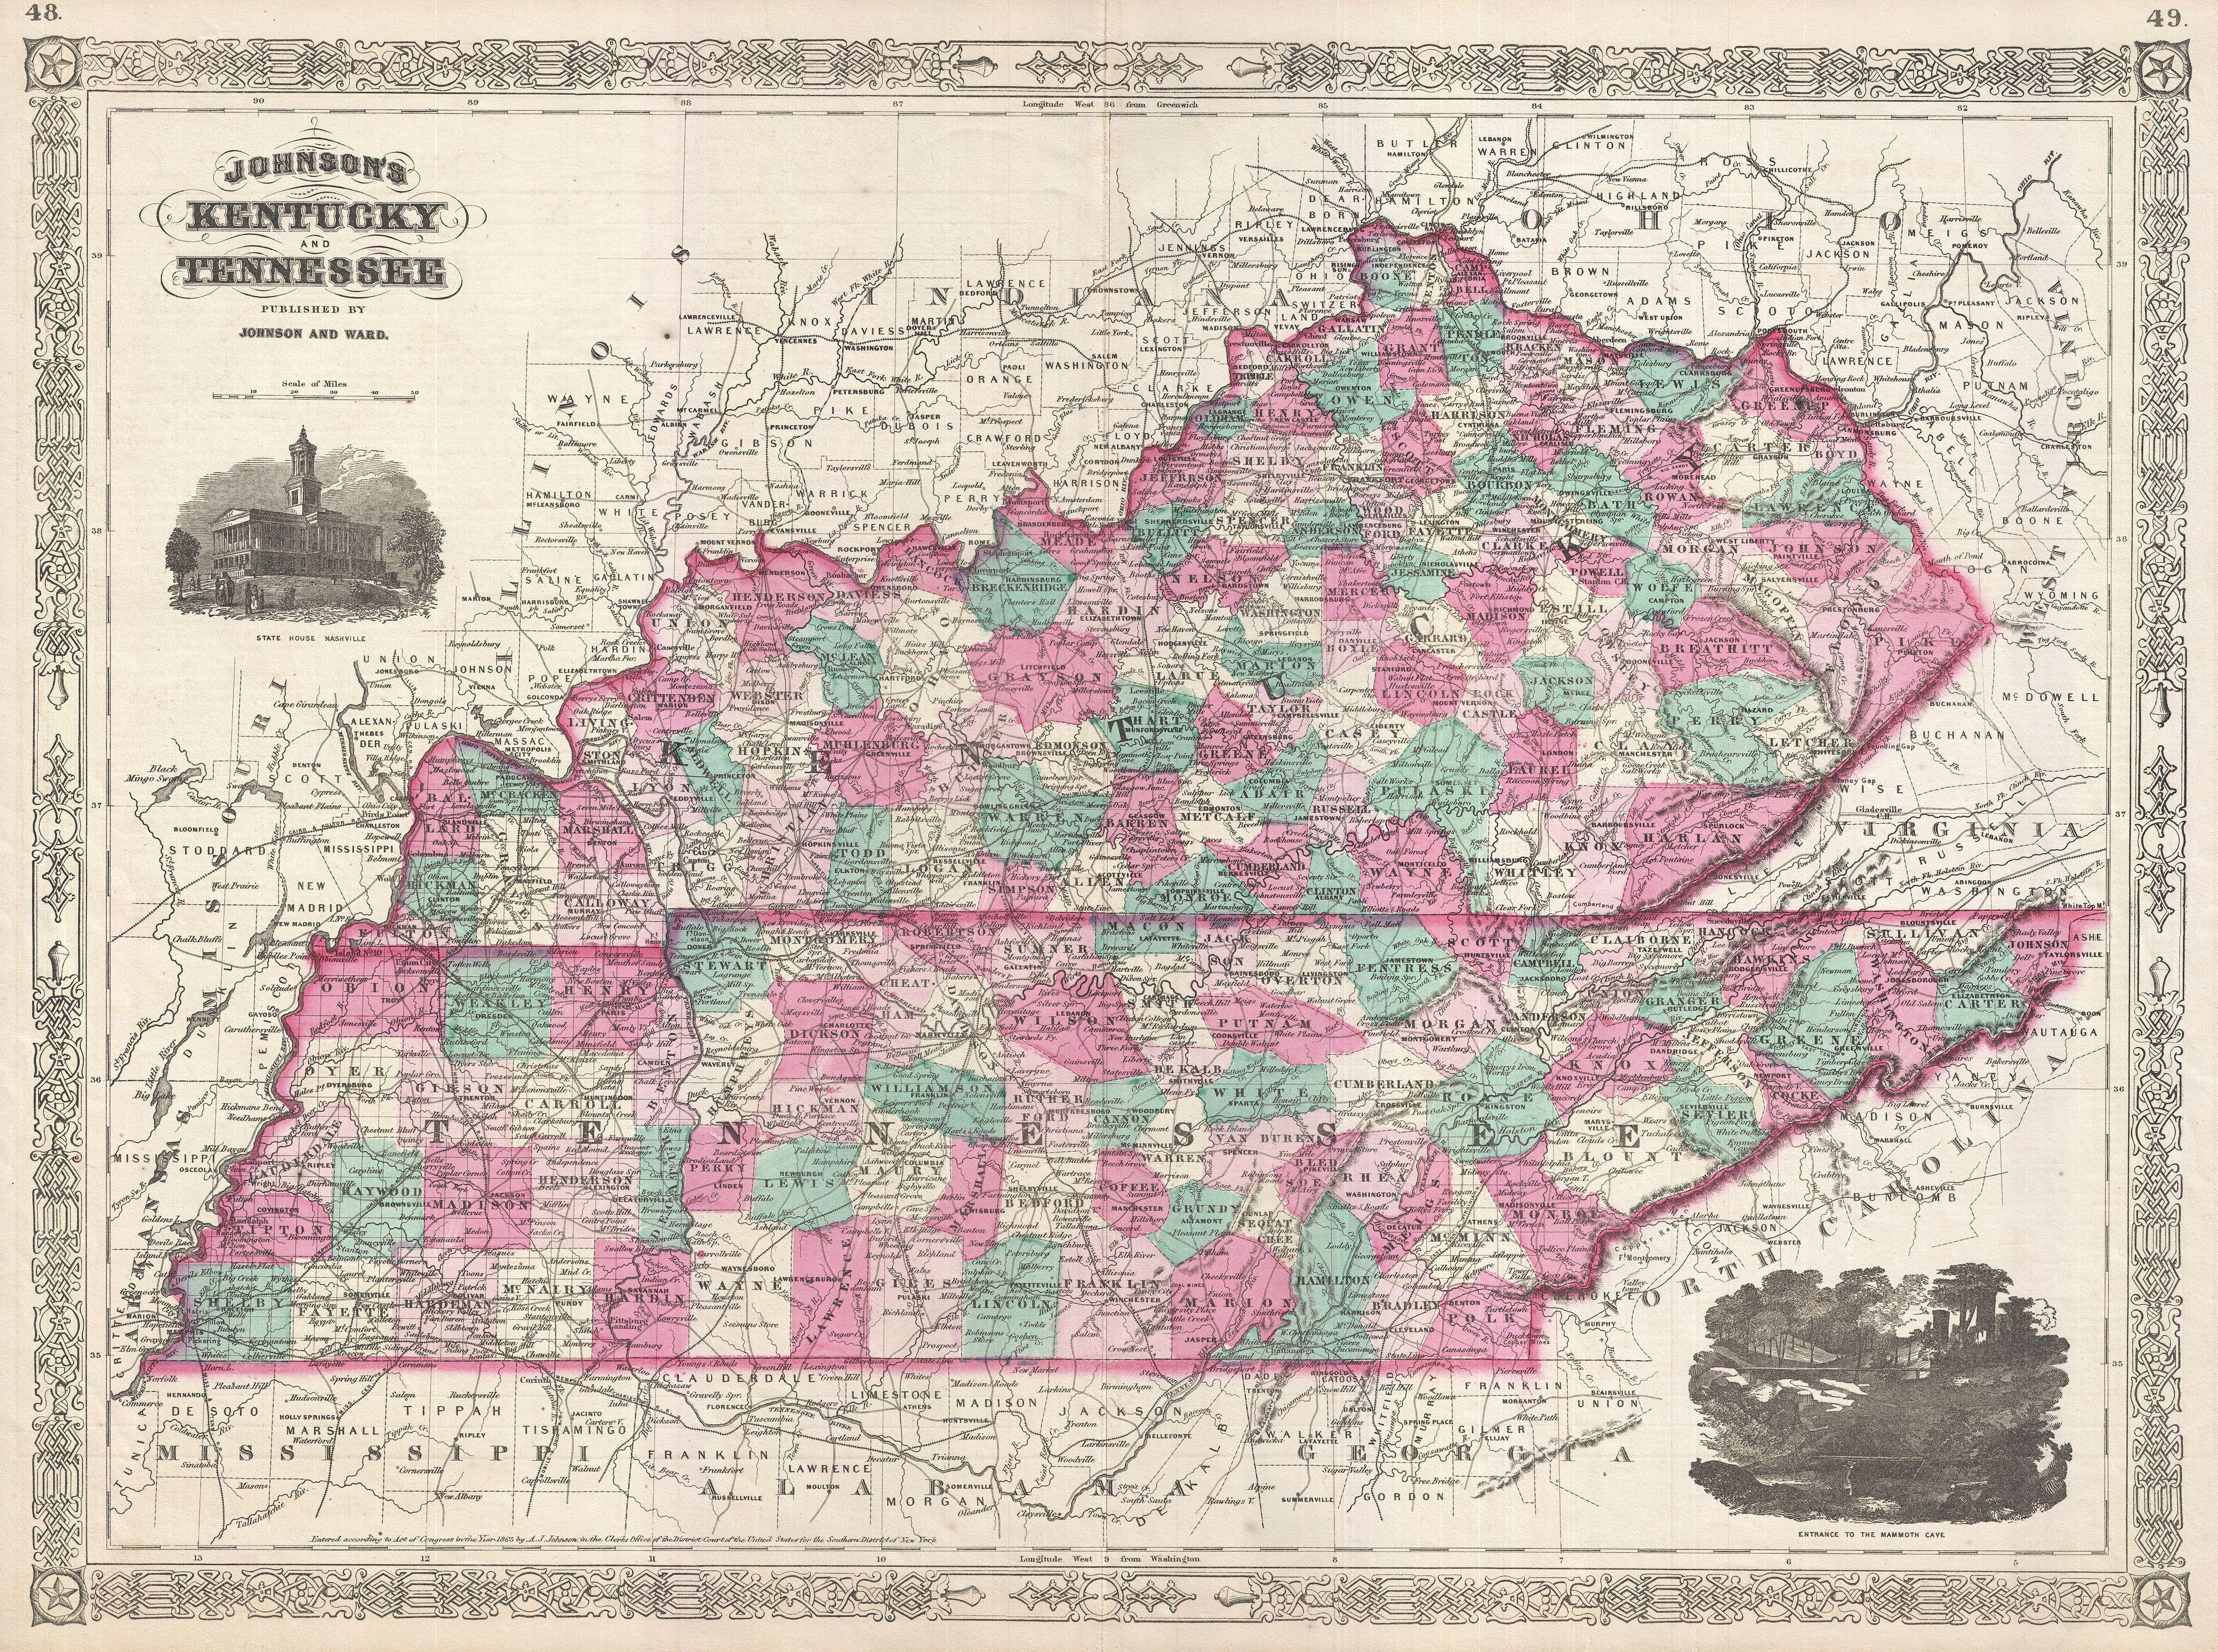 county map of ky and tn File 1866 Johnson Map Of Kentucky And Tennessee Geographicus Kentuckytennessee Johnson 1866 Jpg Wikimedia Commons county map of ky and tn